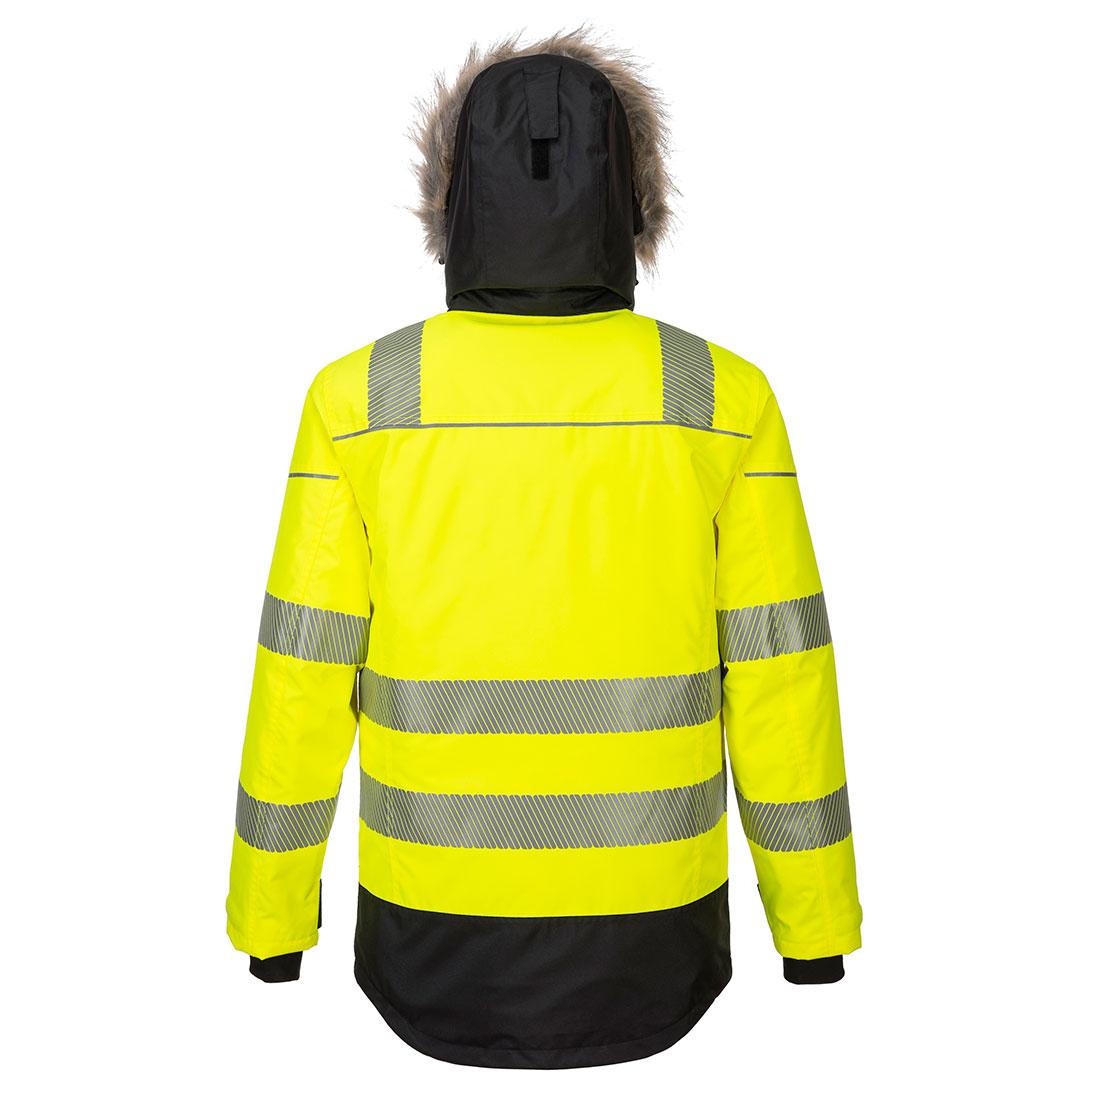 Portwest PW3 Hi-Vis Winter Parka Jacket in Yellow (Product Code: PW369)